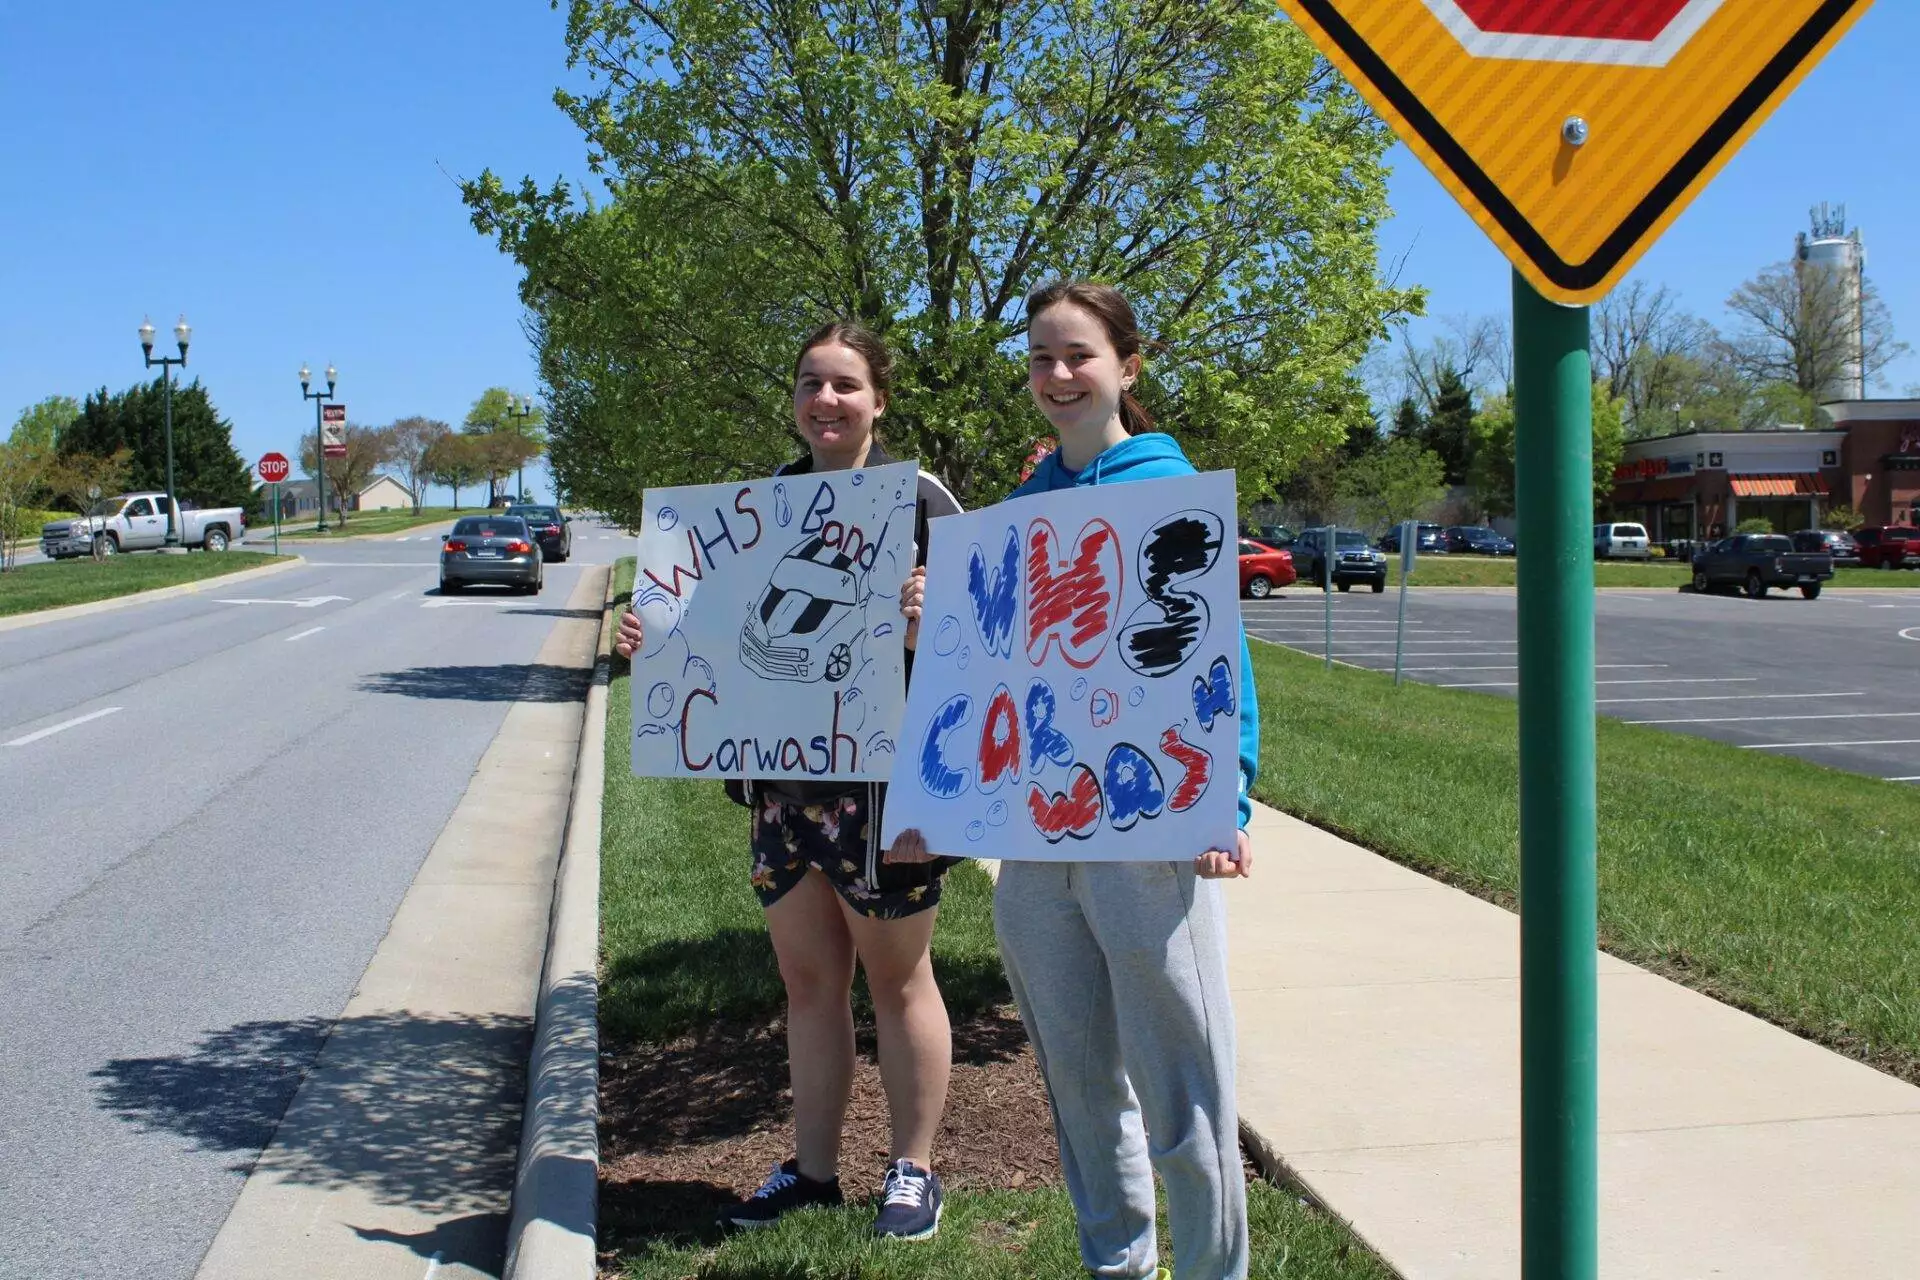 Two teenagers holding signs advertising a car wash fundraiser by the roadside on a sunny day.